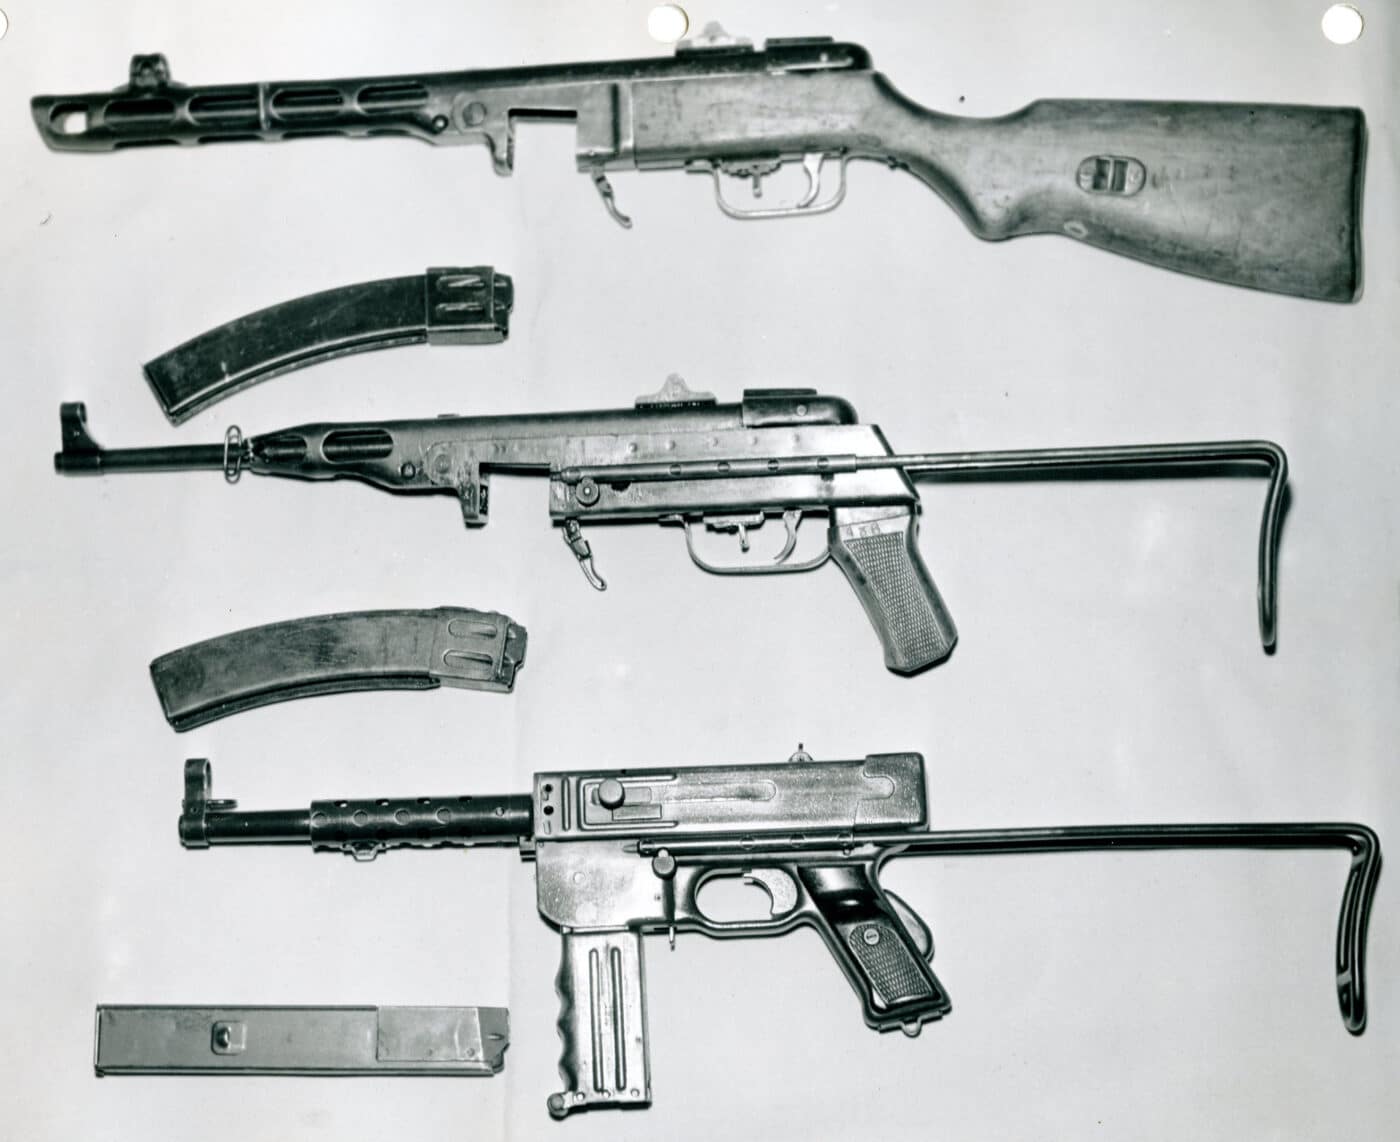 SMGs carried by Viet Cong